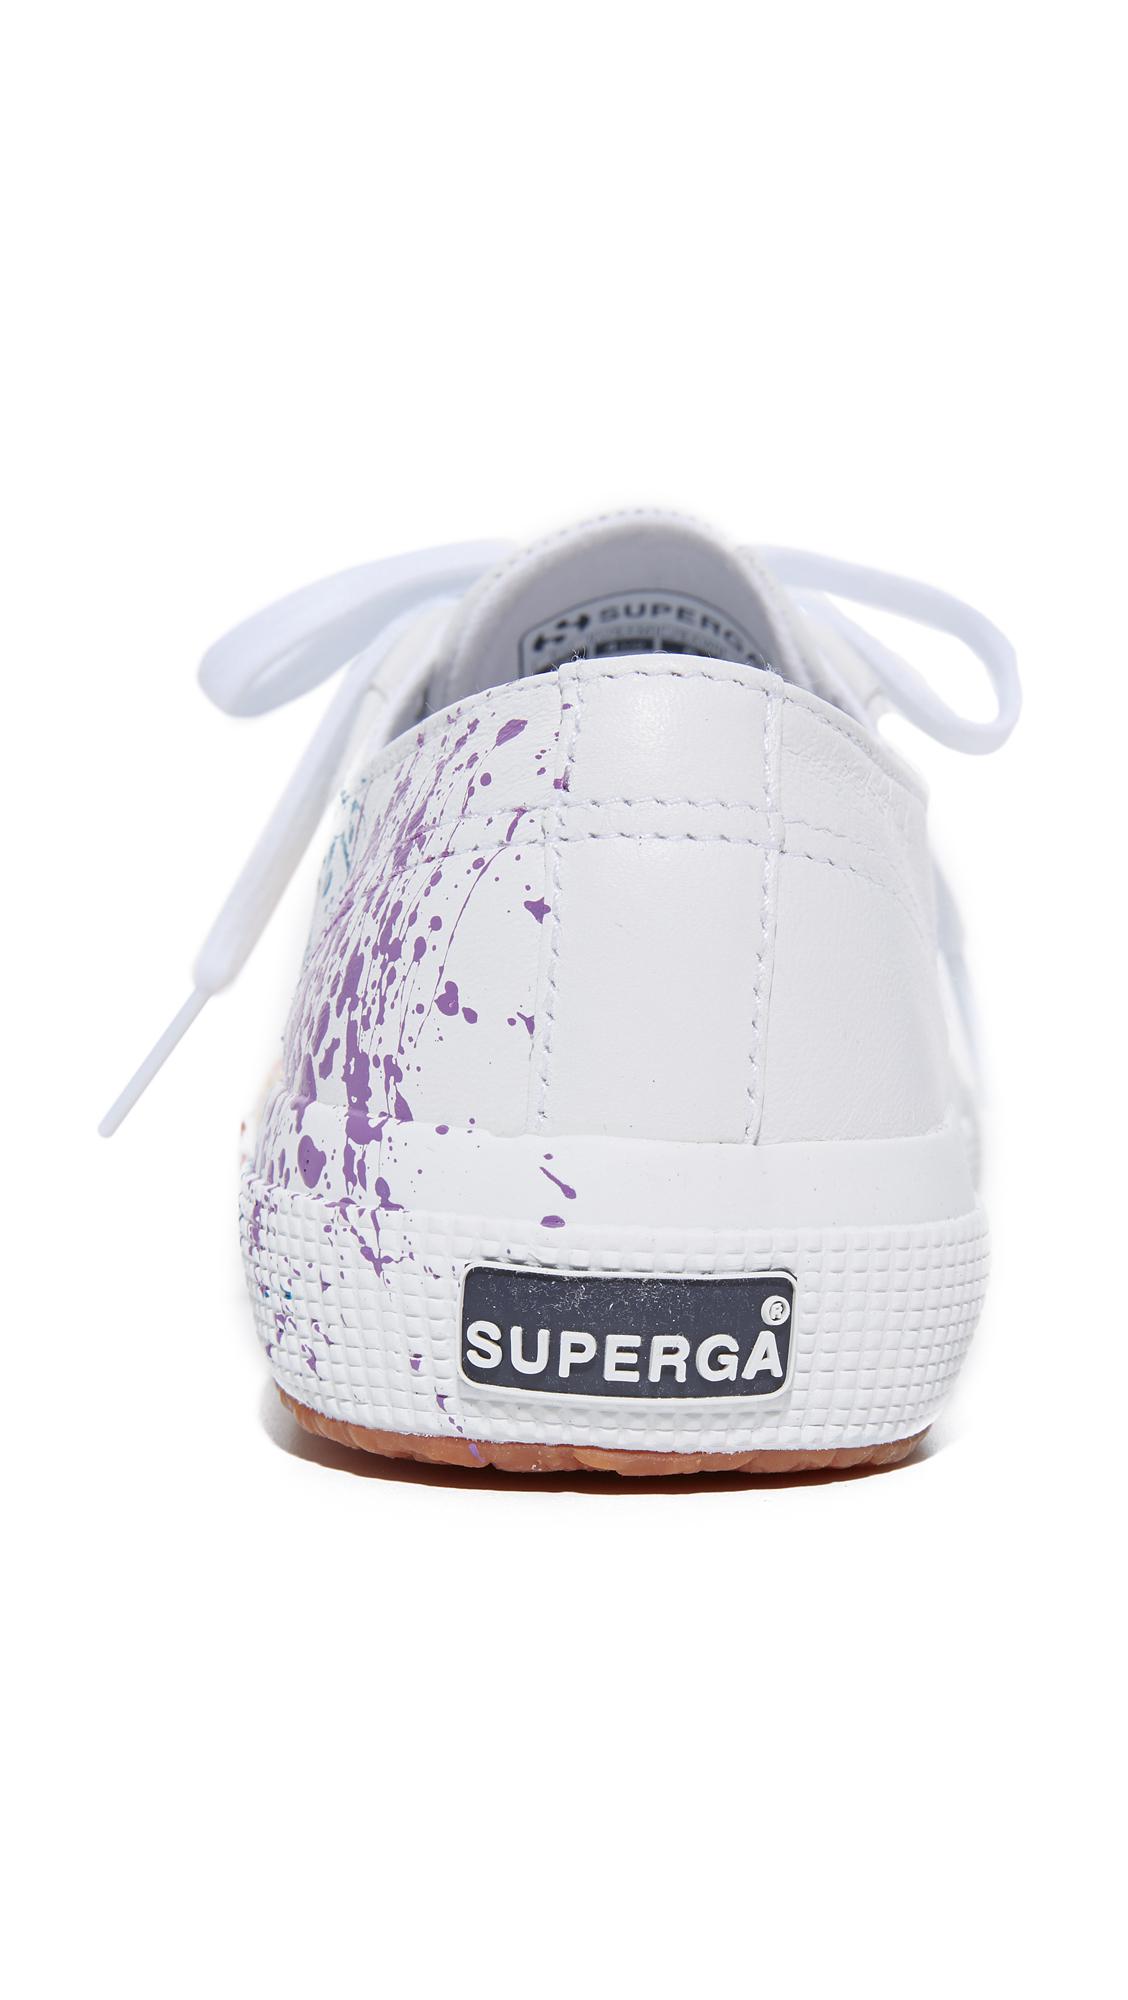 Lyst Superga 2750 Leather Splatter Paint Sneakers in White